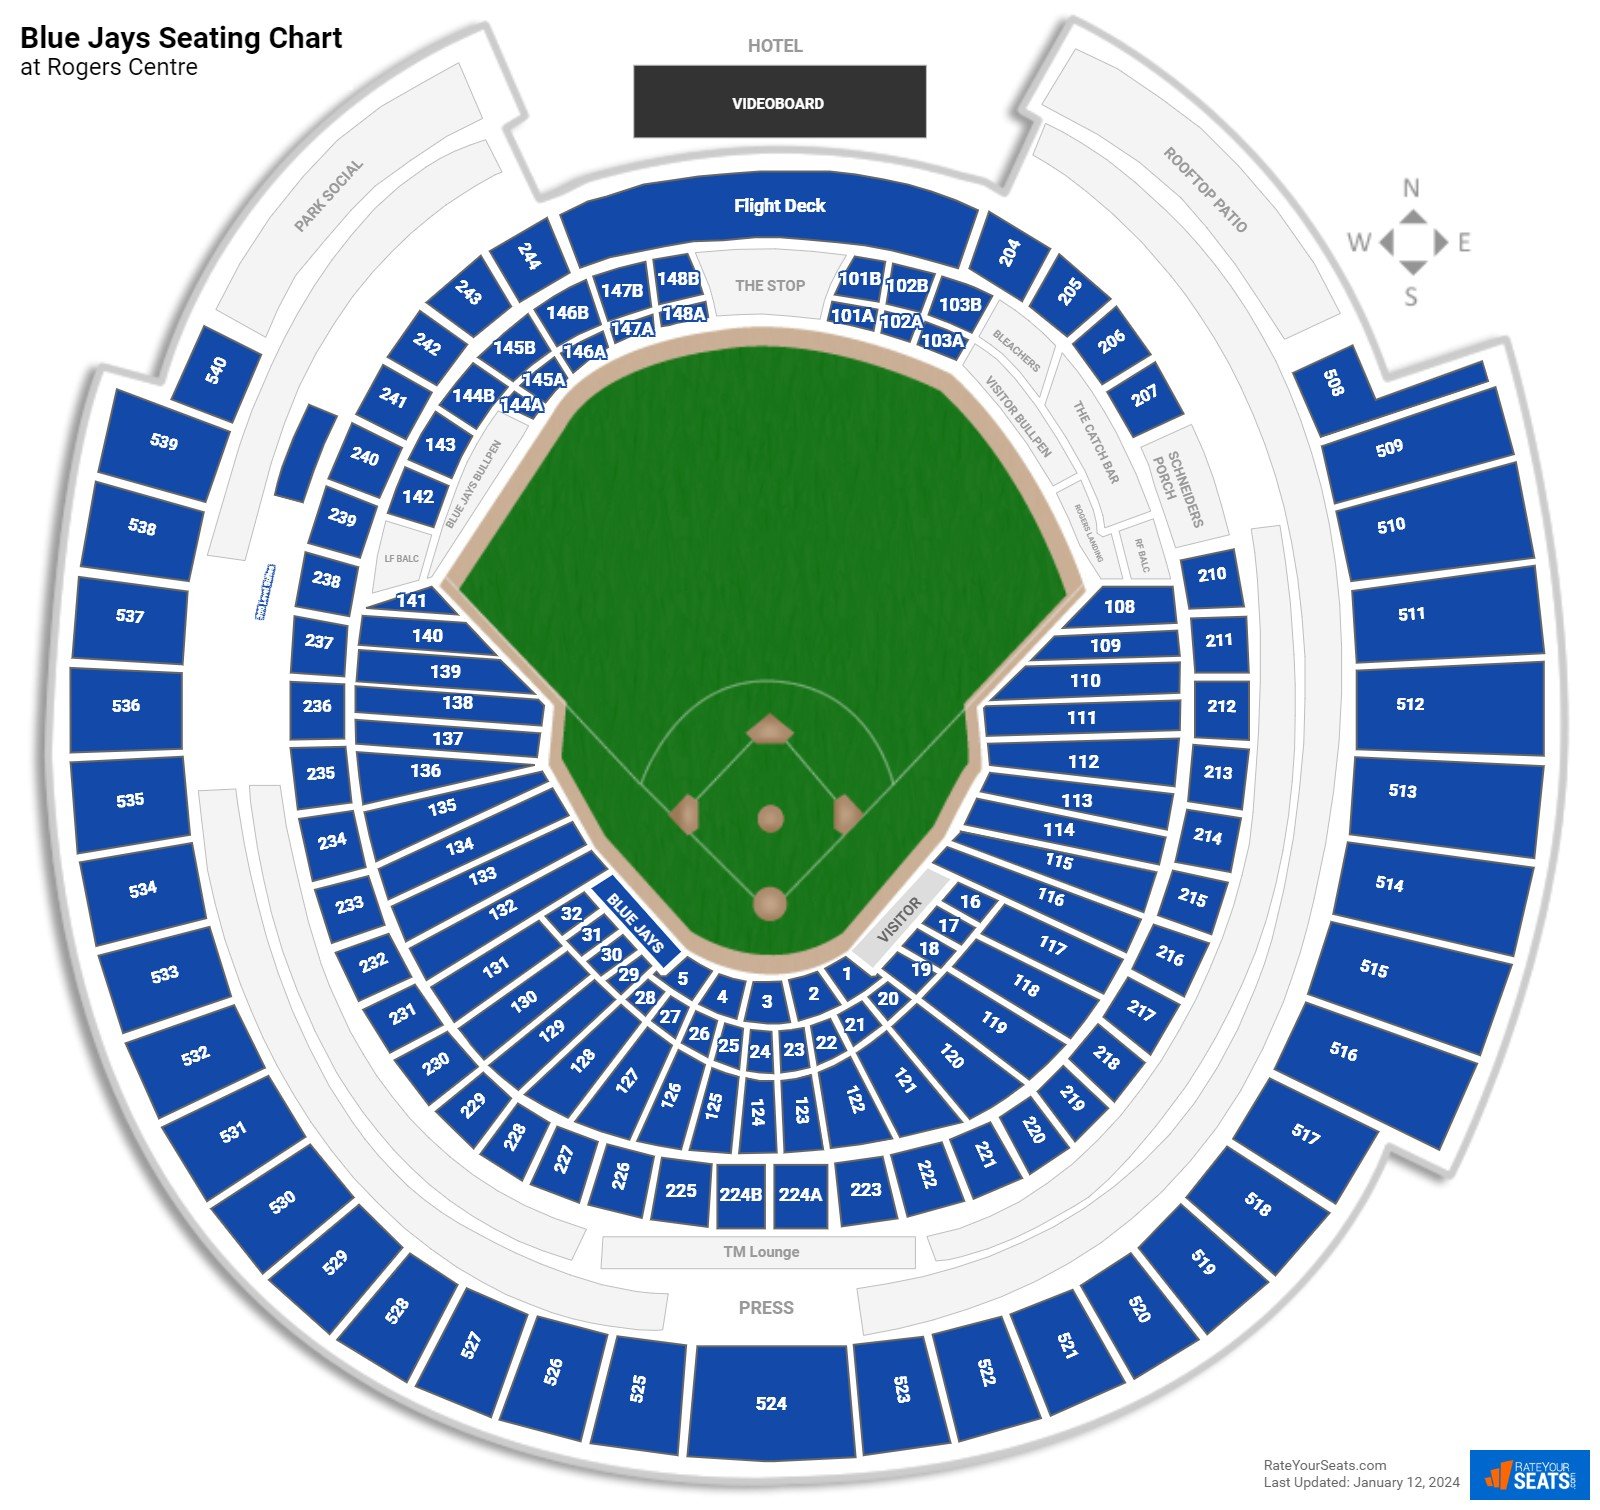 Toronto Blue Jays Seating Chart at Rogers Centre